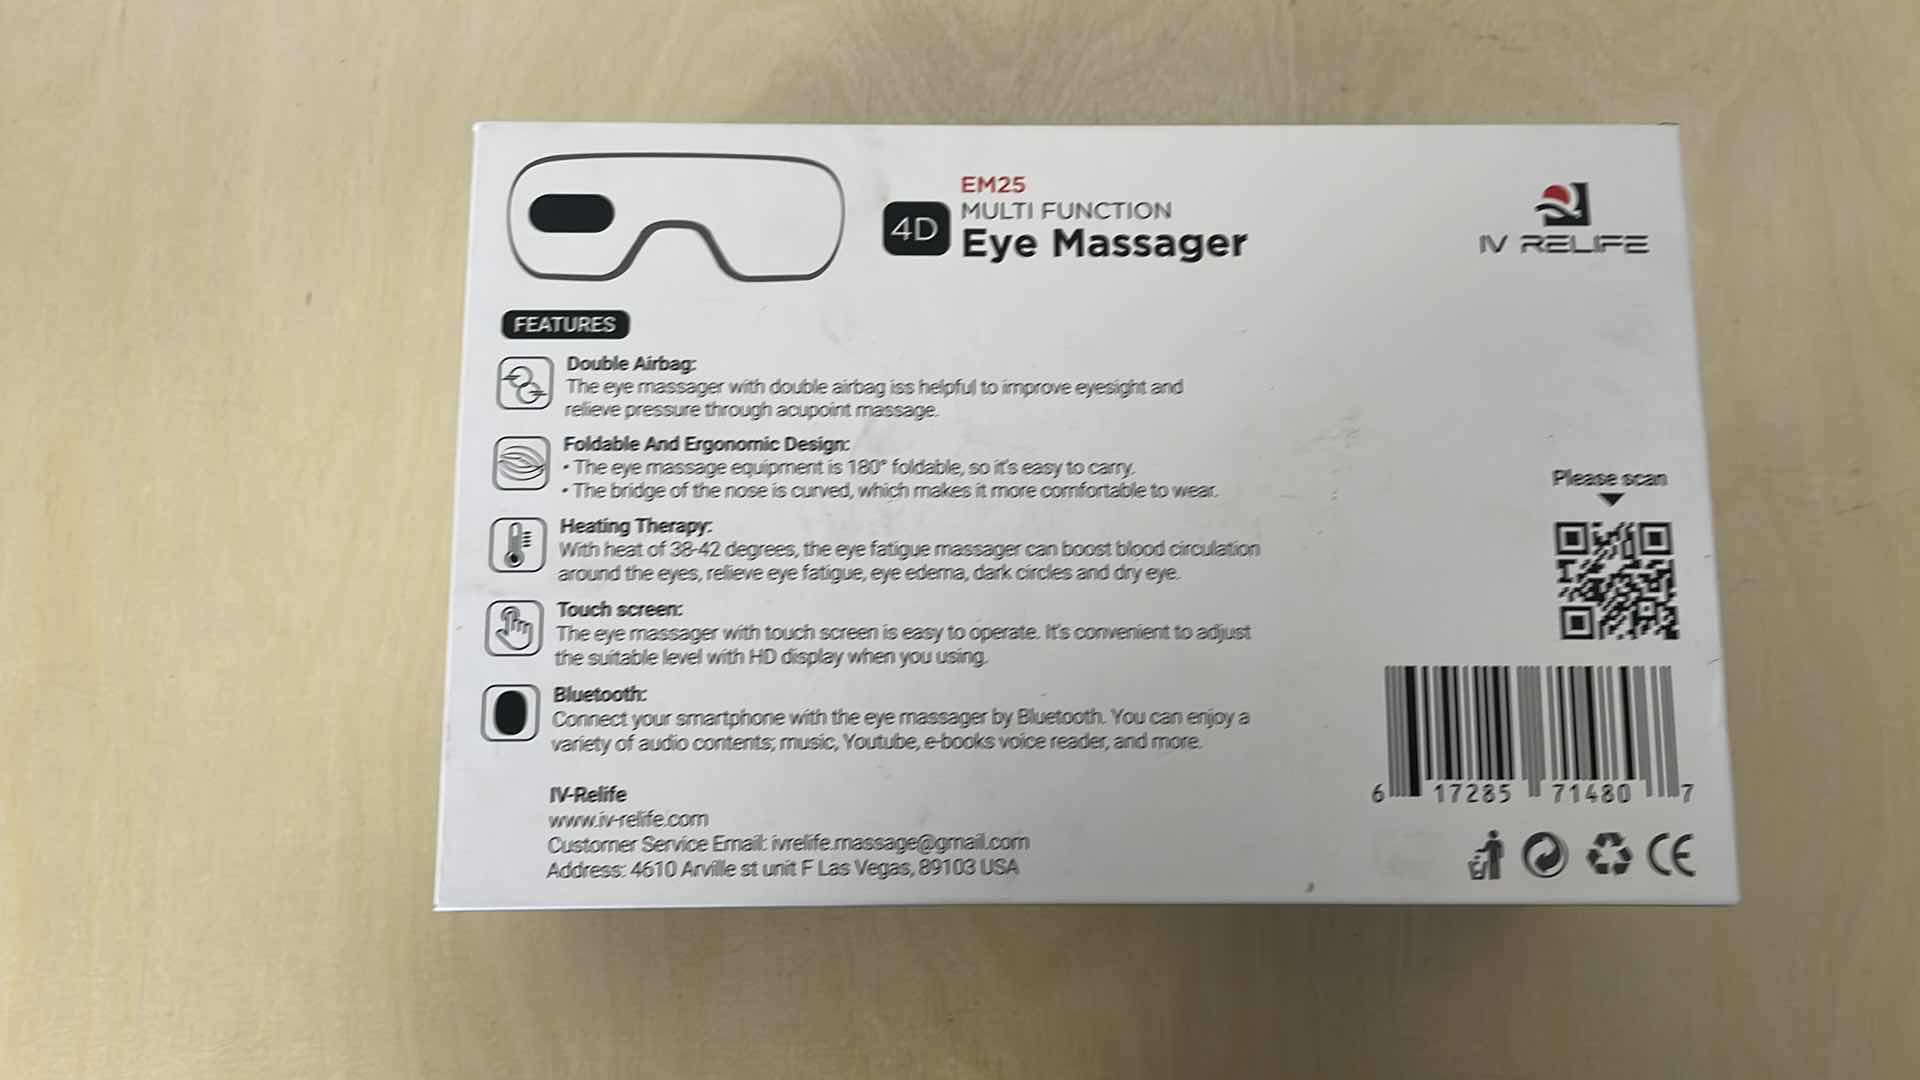 Photo 2 of IV RELIFE 4D EYE MASSAGER